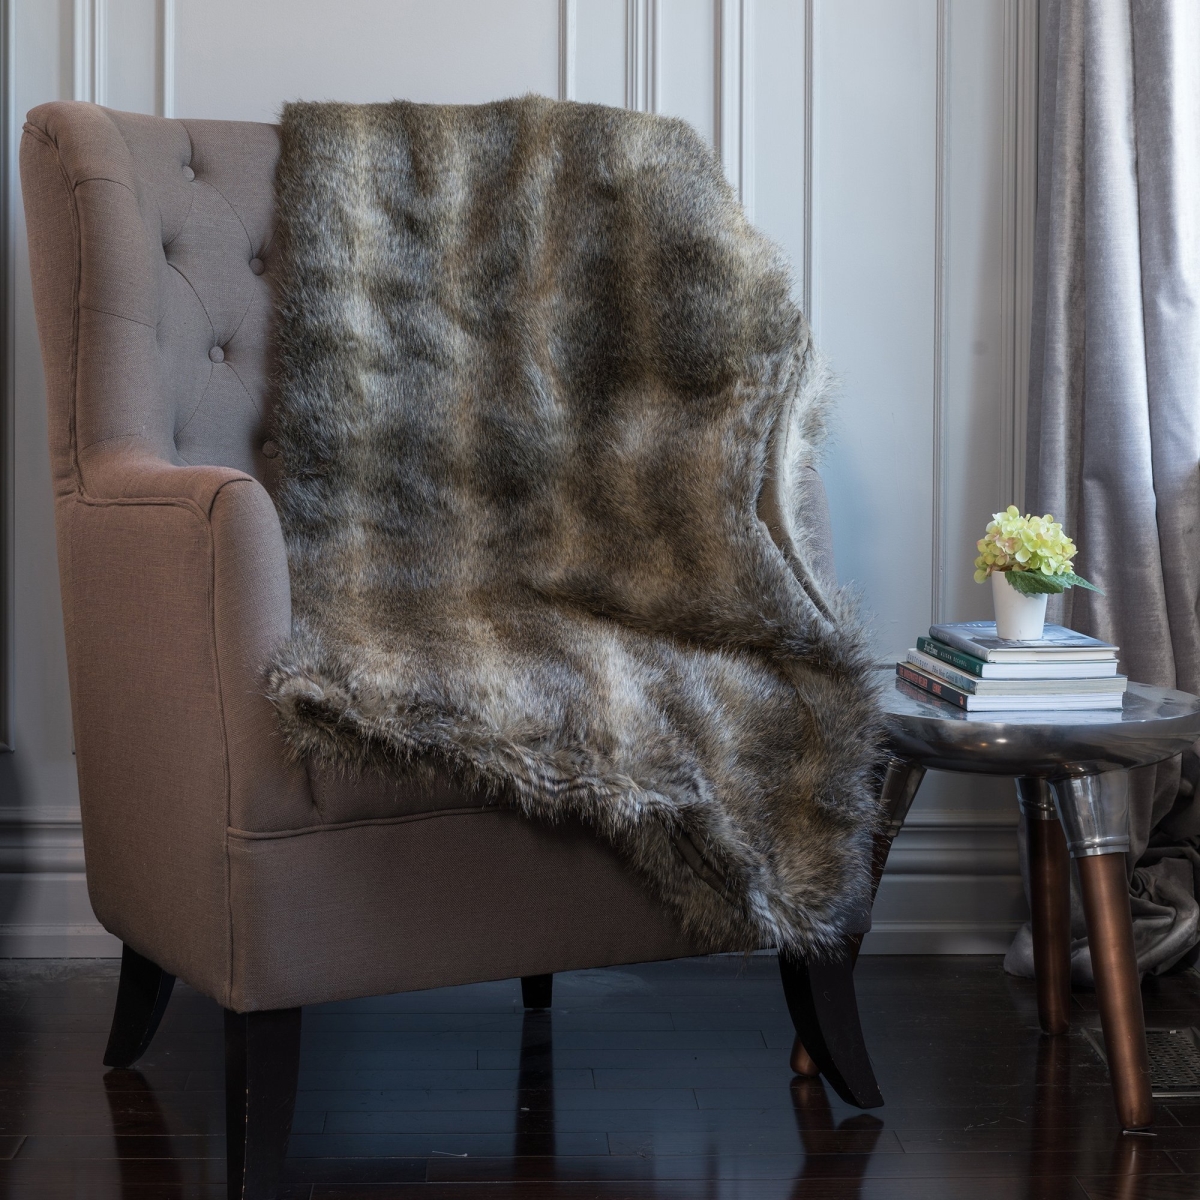 Sq-at-wbeff-5060 50 X 60 In. Wolf Faux Fur Throw Blanket - Beige